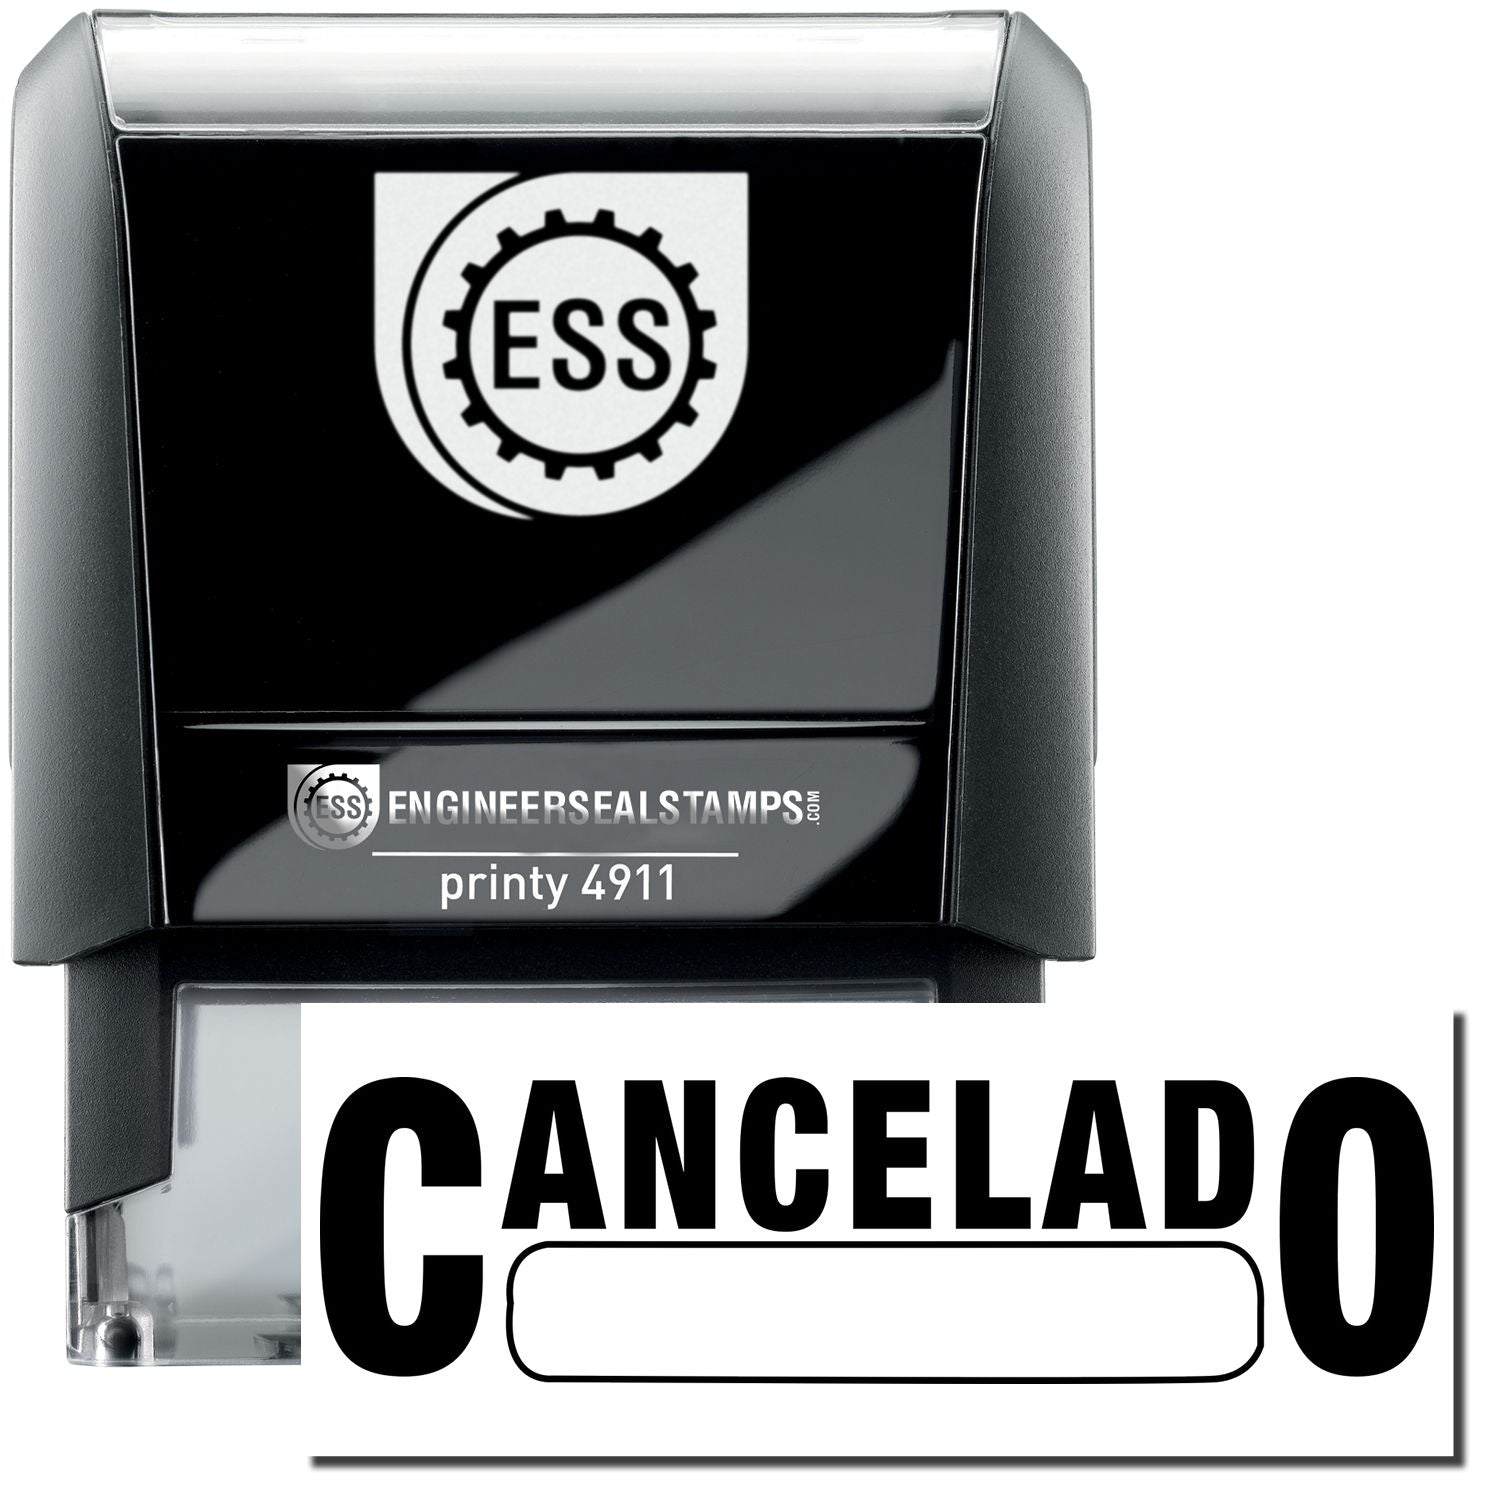 A self-inking stamp with a stamped image showing how the text "CANCELADO" with a box below the text is displayed after stamping.